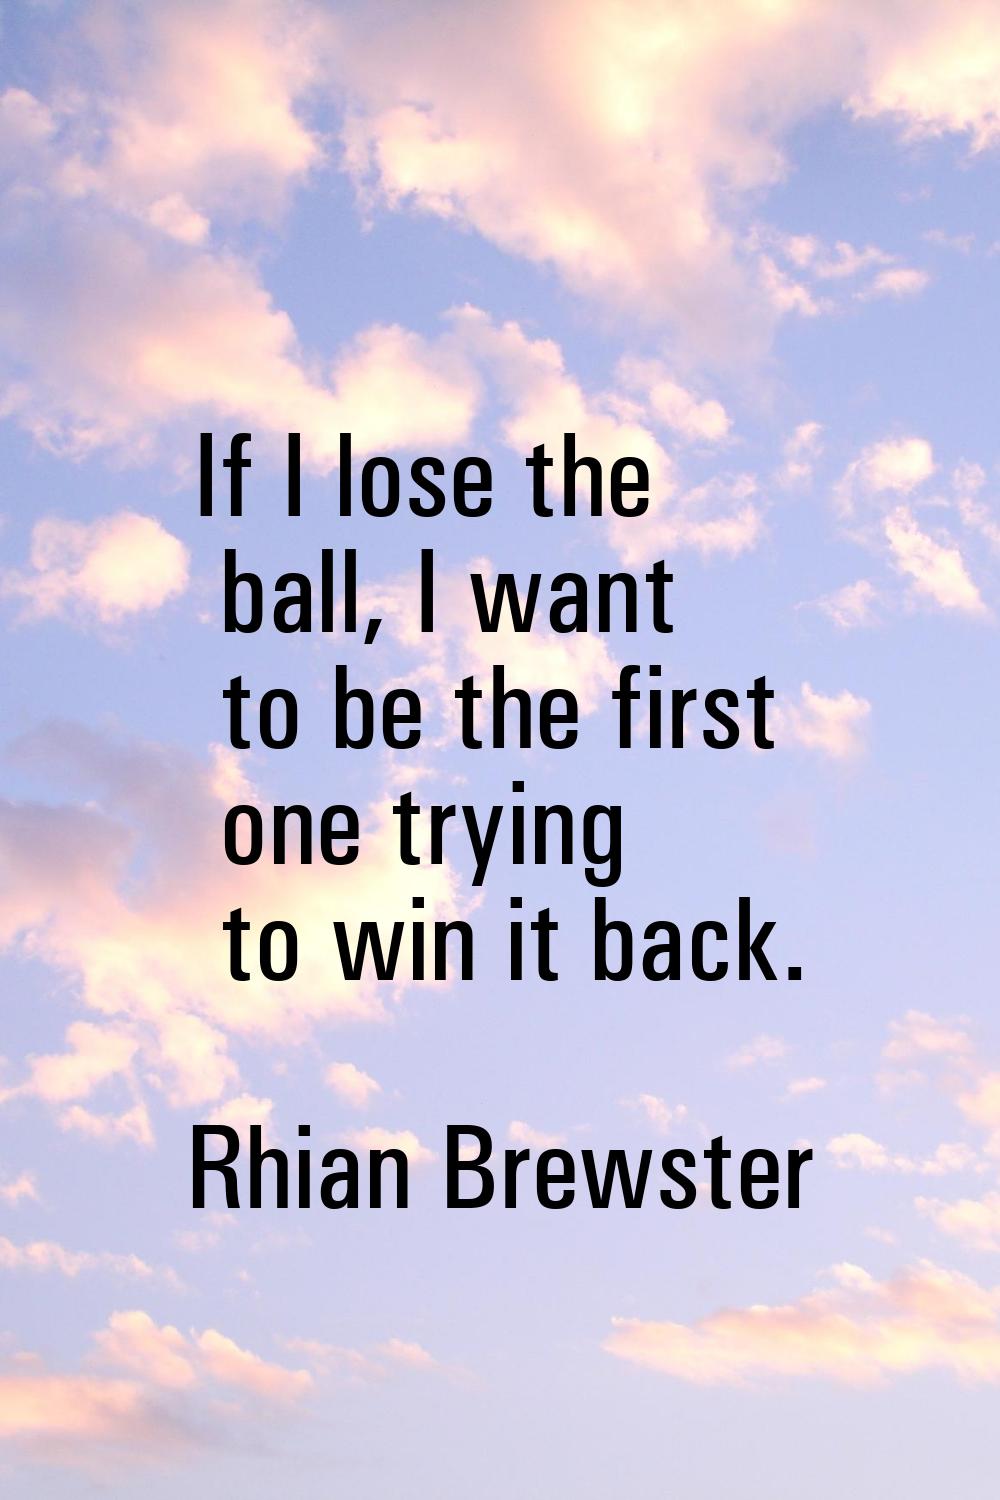 If I lose the ball, I want to be the first one trying to win it back.